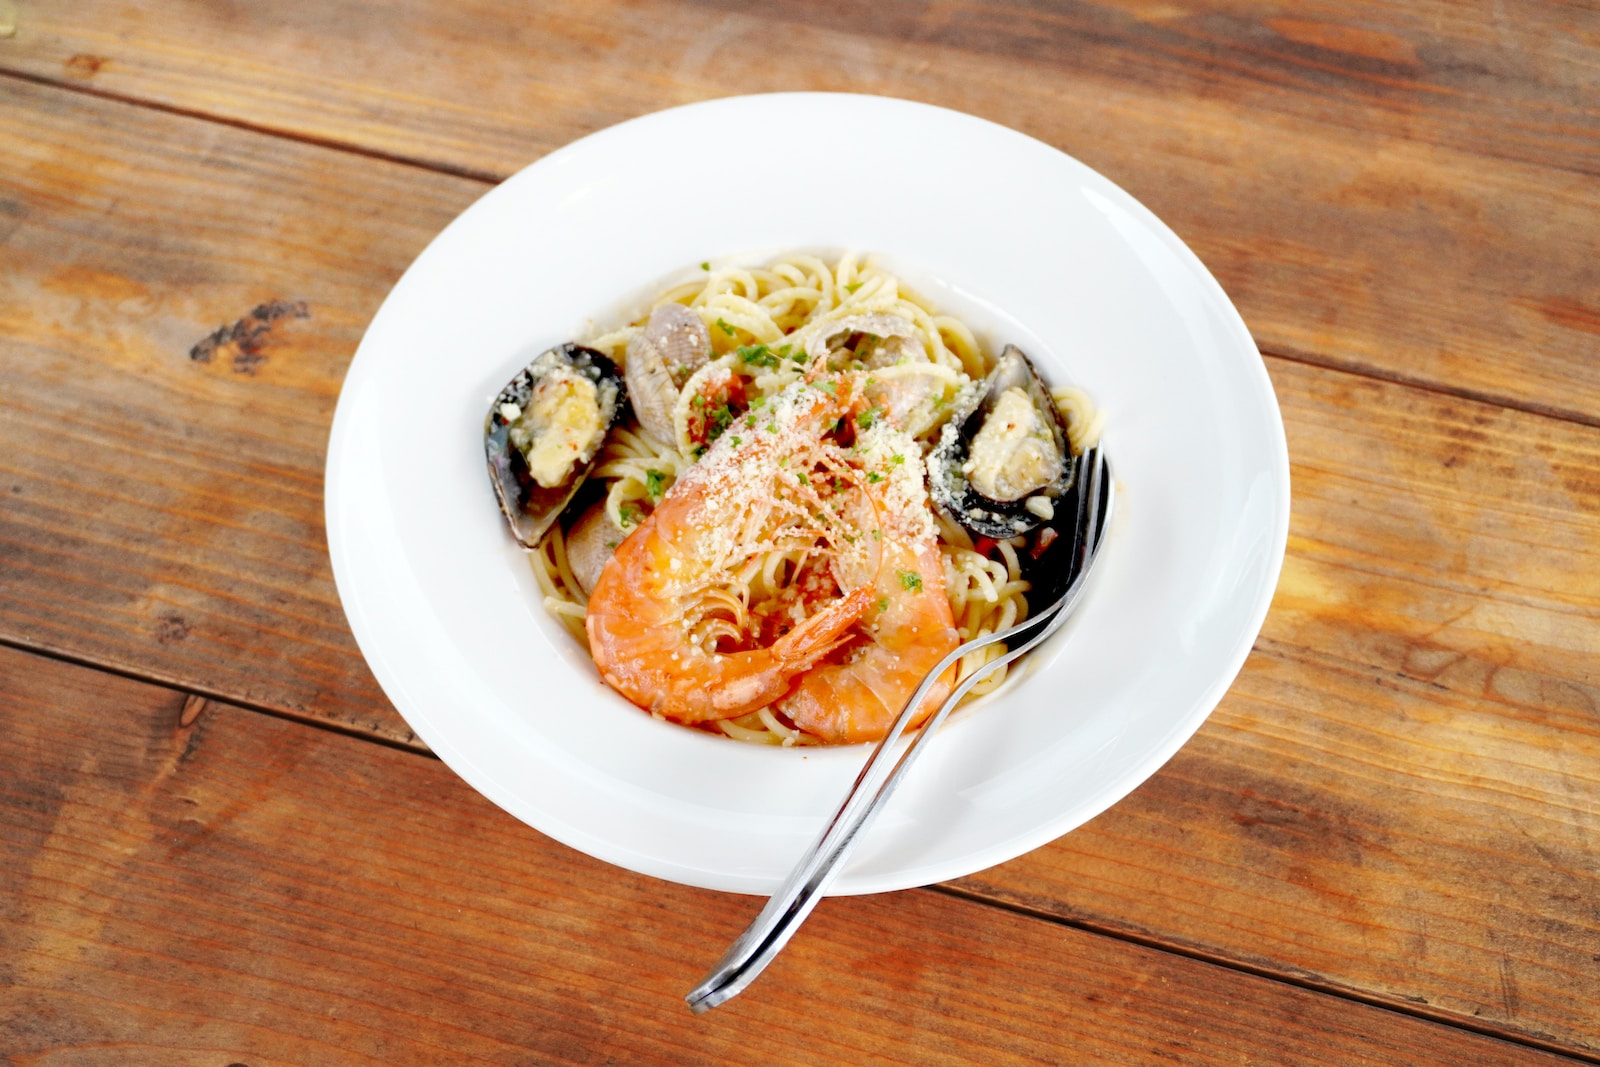 a plate of pasta with shrimp, mussels and parmesan cheese